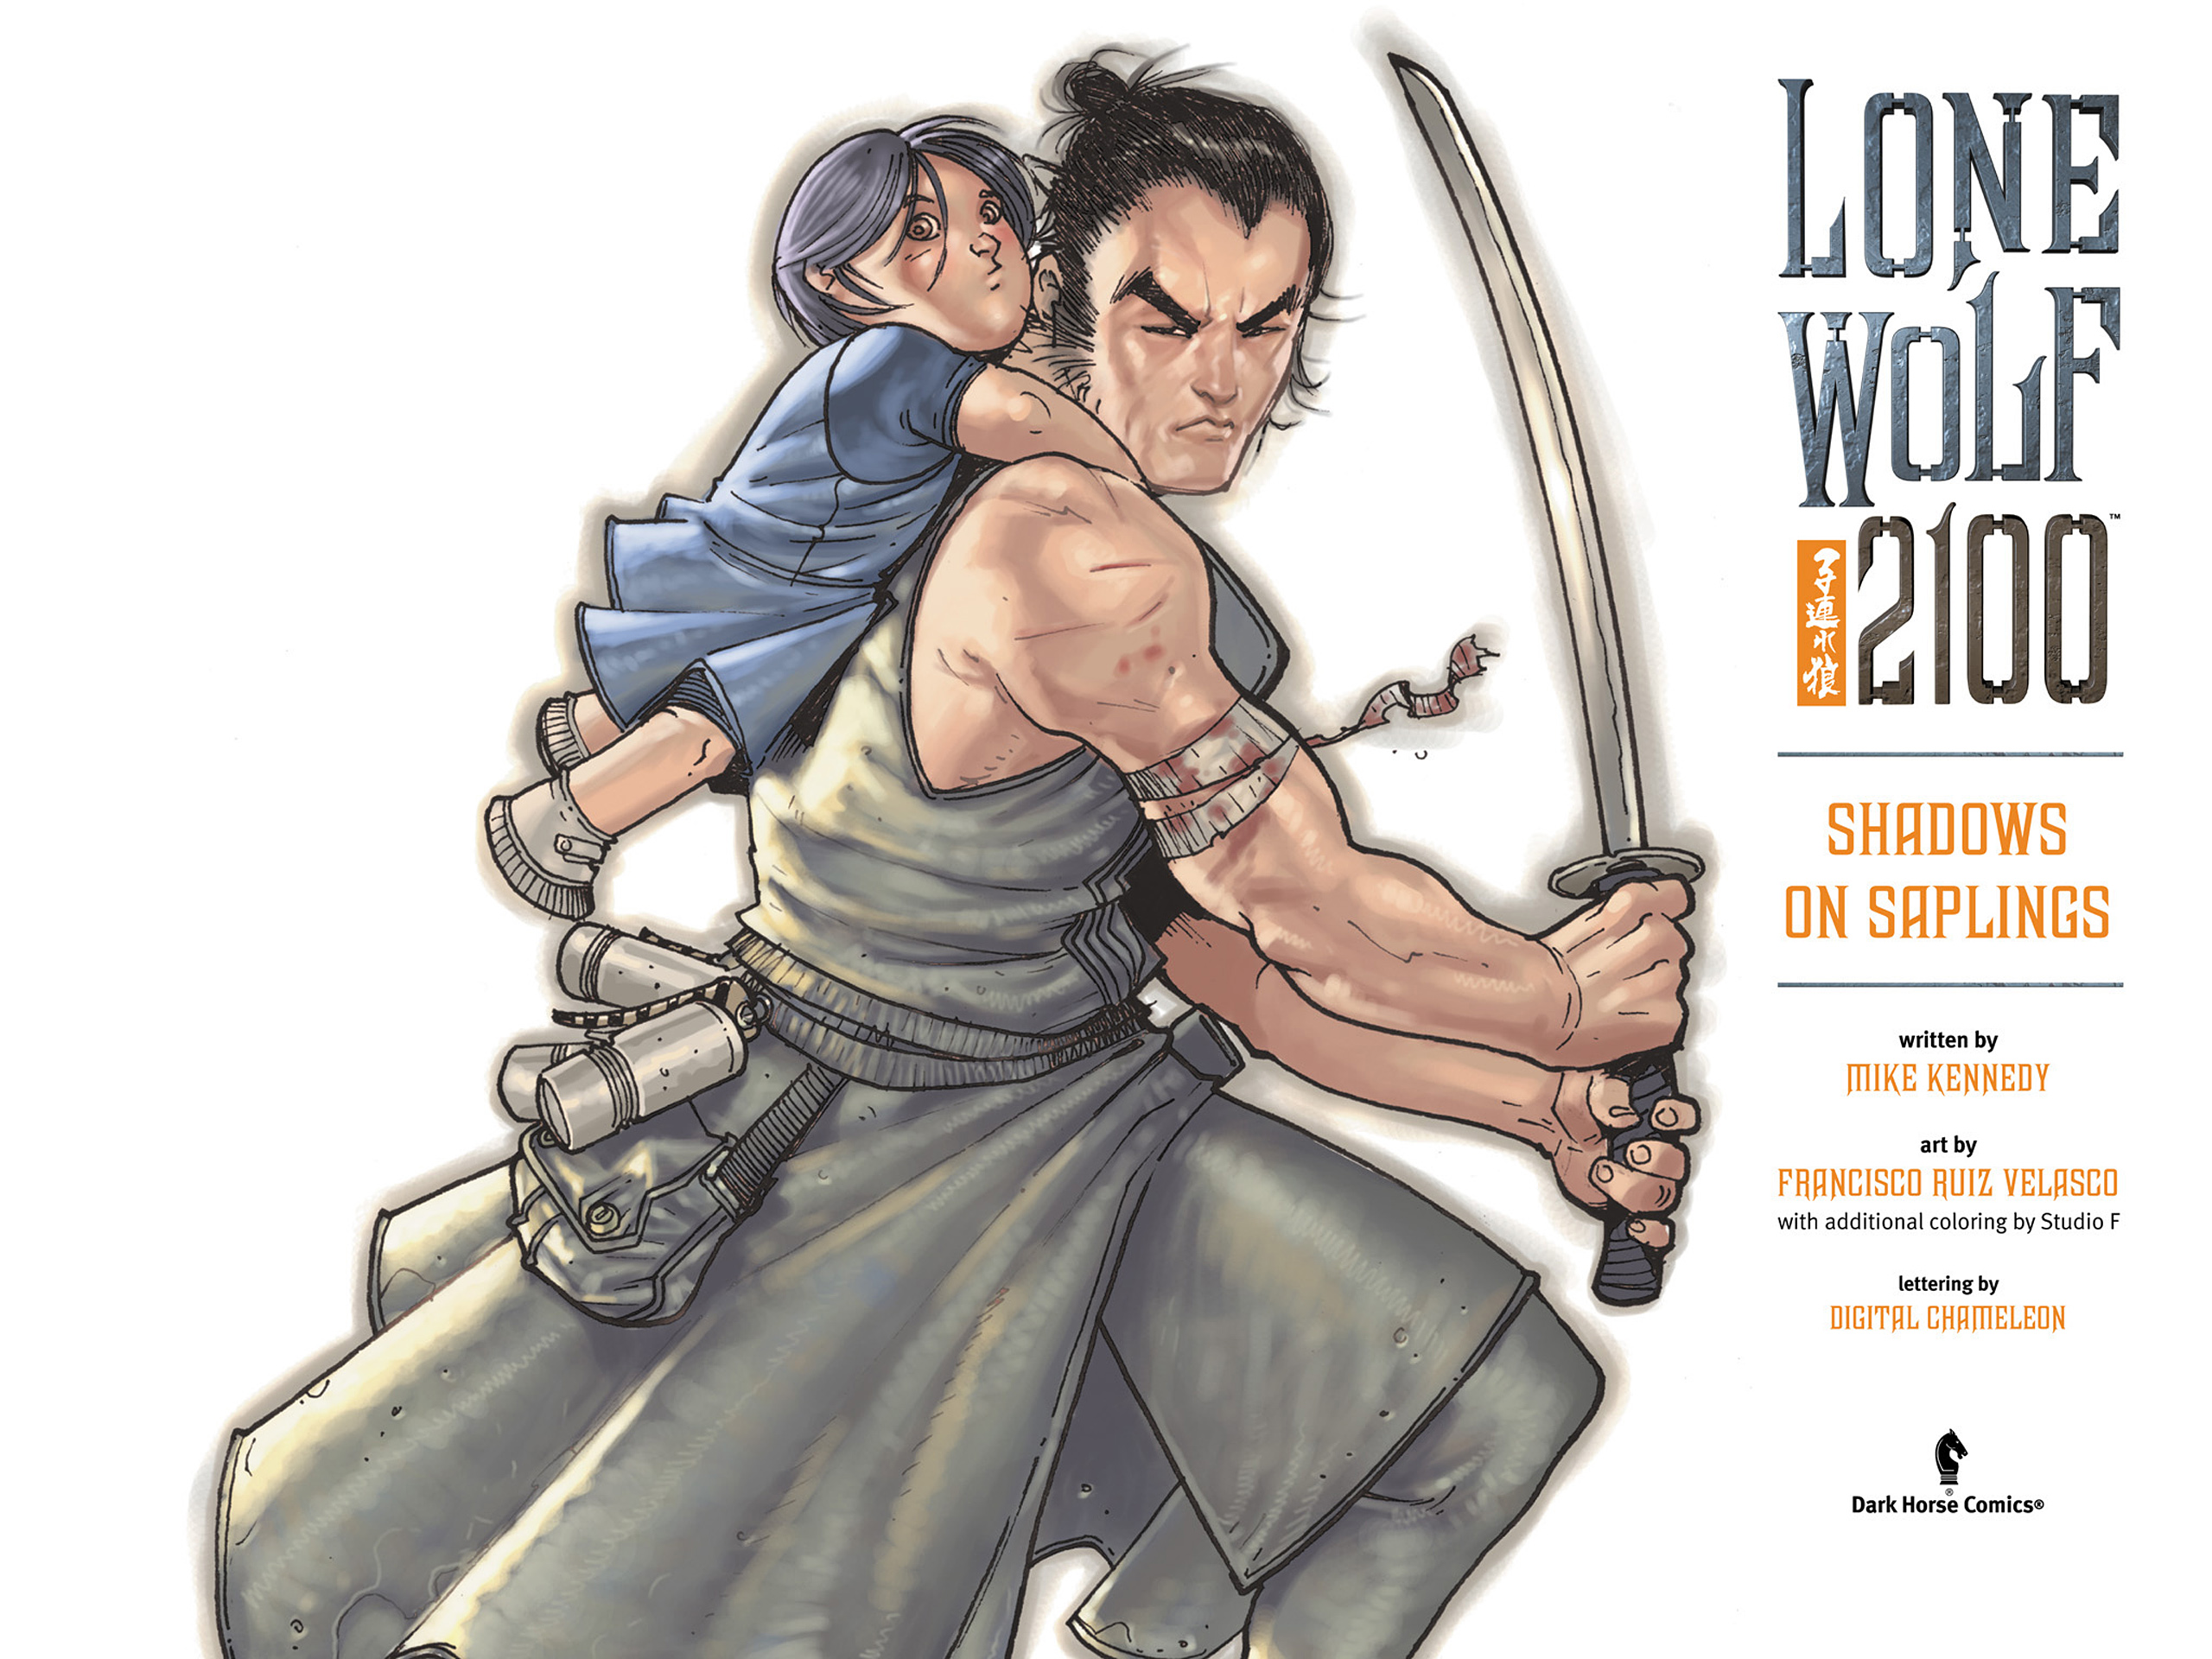 Read online Lone Wolf 2100 comic -  Issue # TPB 1 - 3